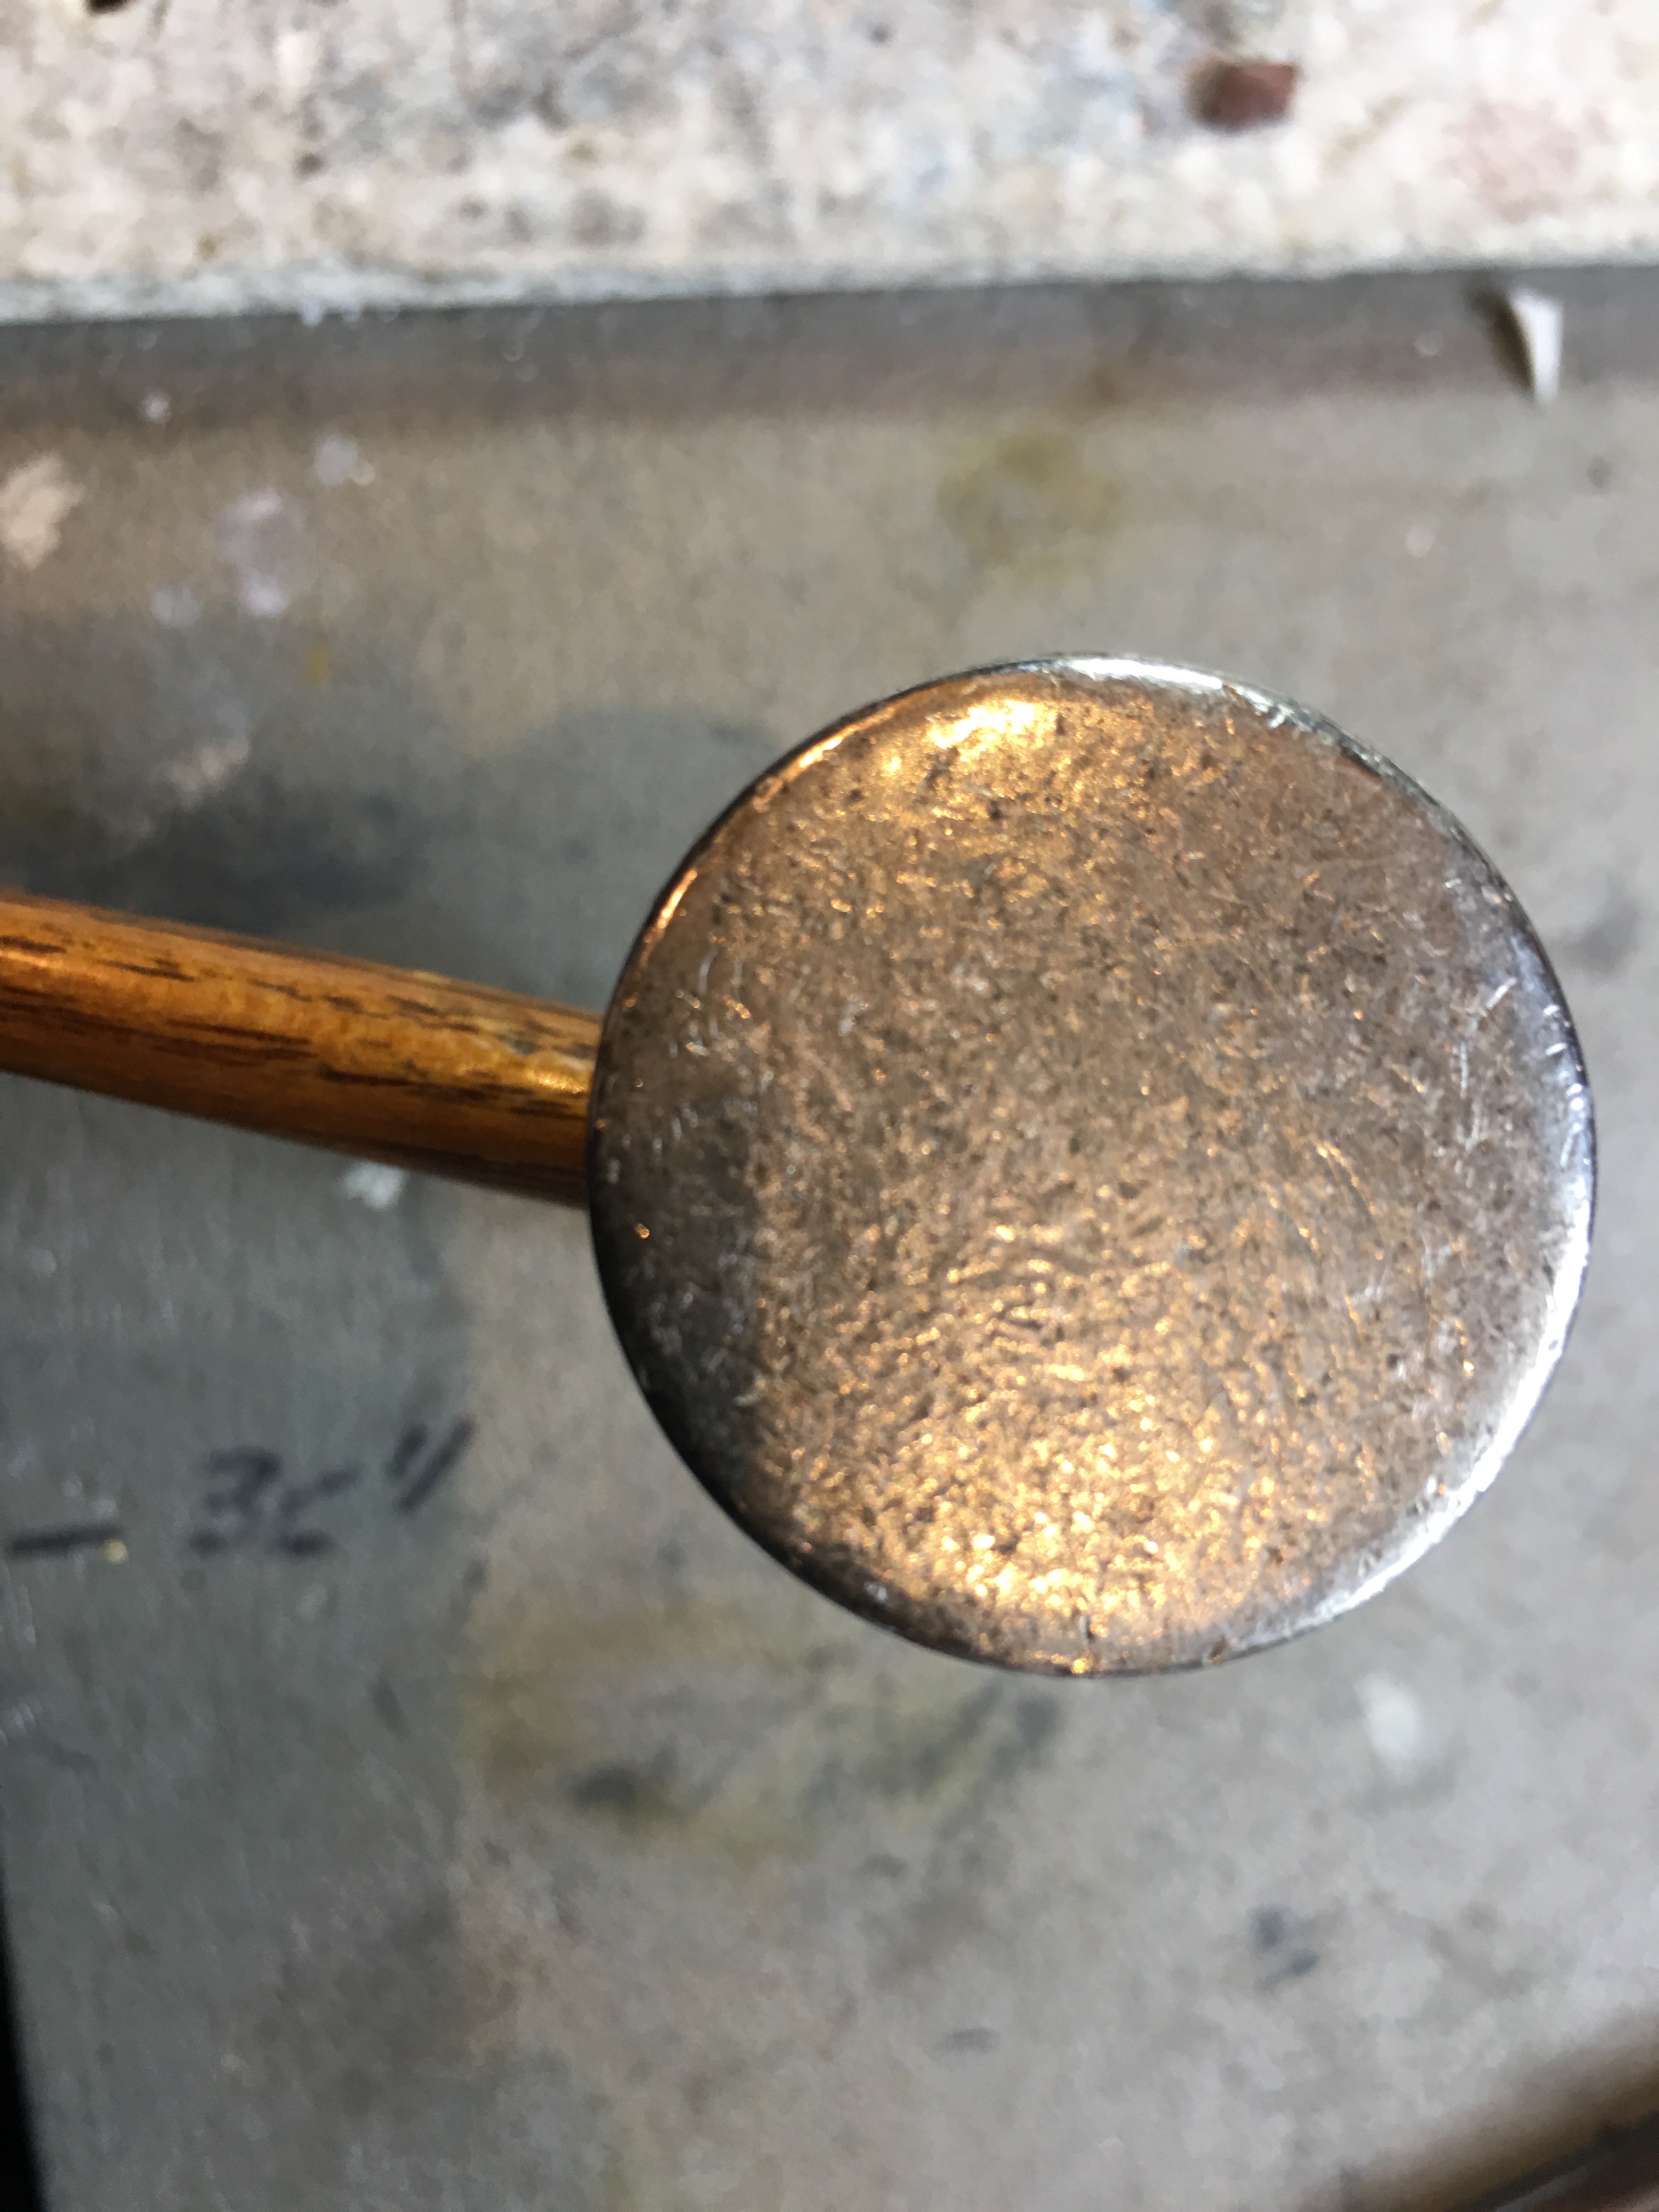 Stainless Steel Chasing Hammer - Findings Outlet